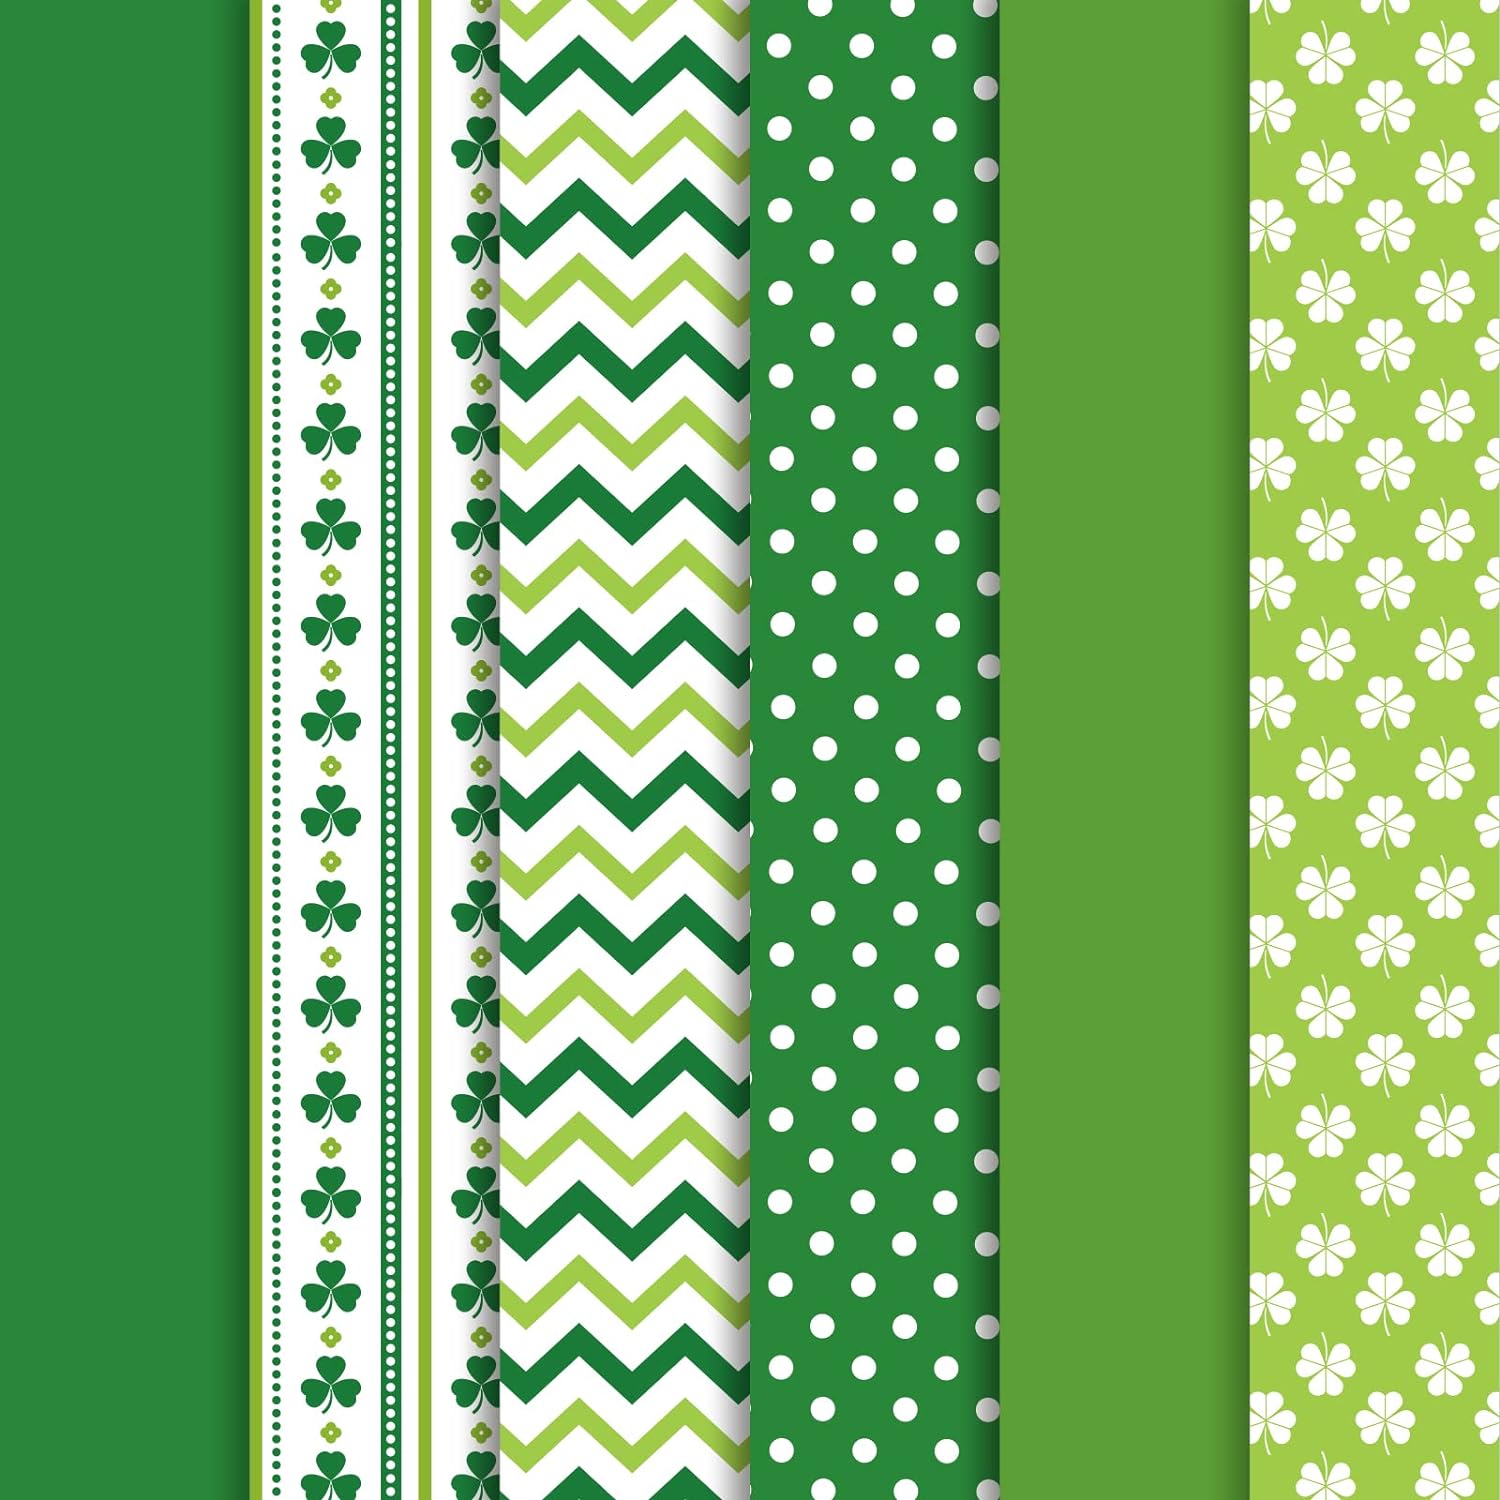 Whaline 90 Sheet St. Patrick' Day Tissue Paper Green Shamrock Clover Dot Wave Pattern Wrapping Paper 6 Design Irish Spring HolidayArt Tissue Paper for Gift Packing DIY Crafts Decor, 13.8 x 19.7in